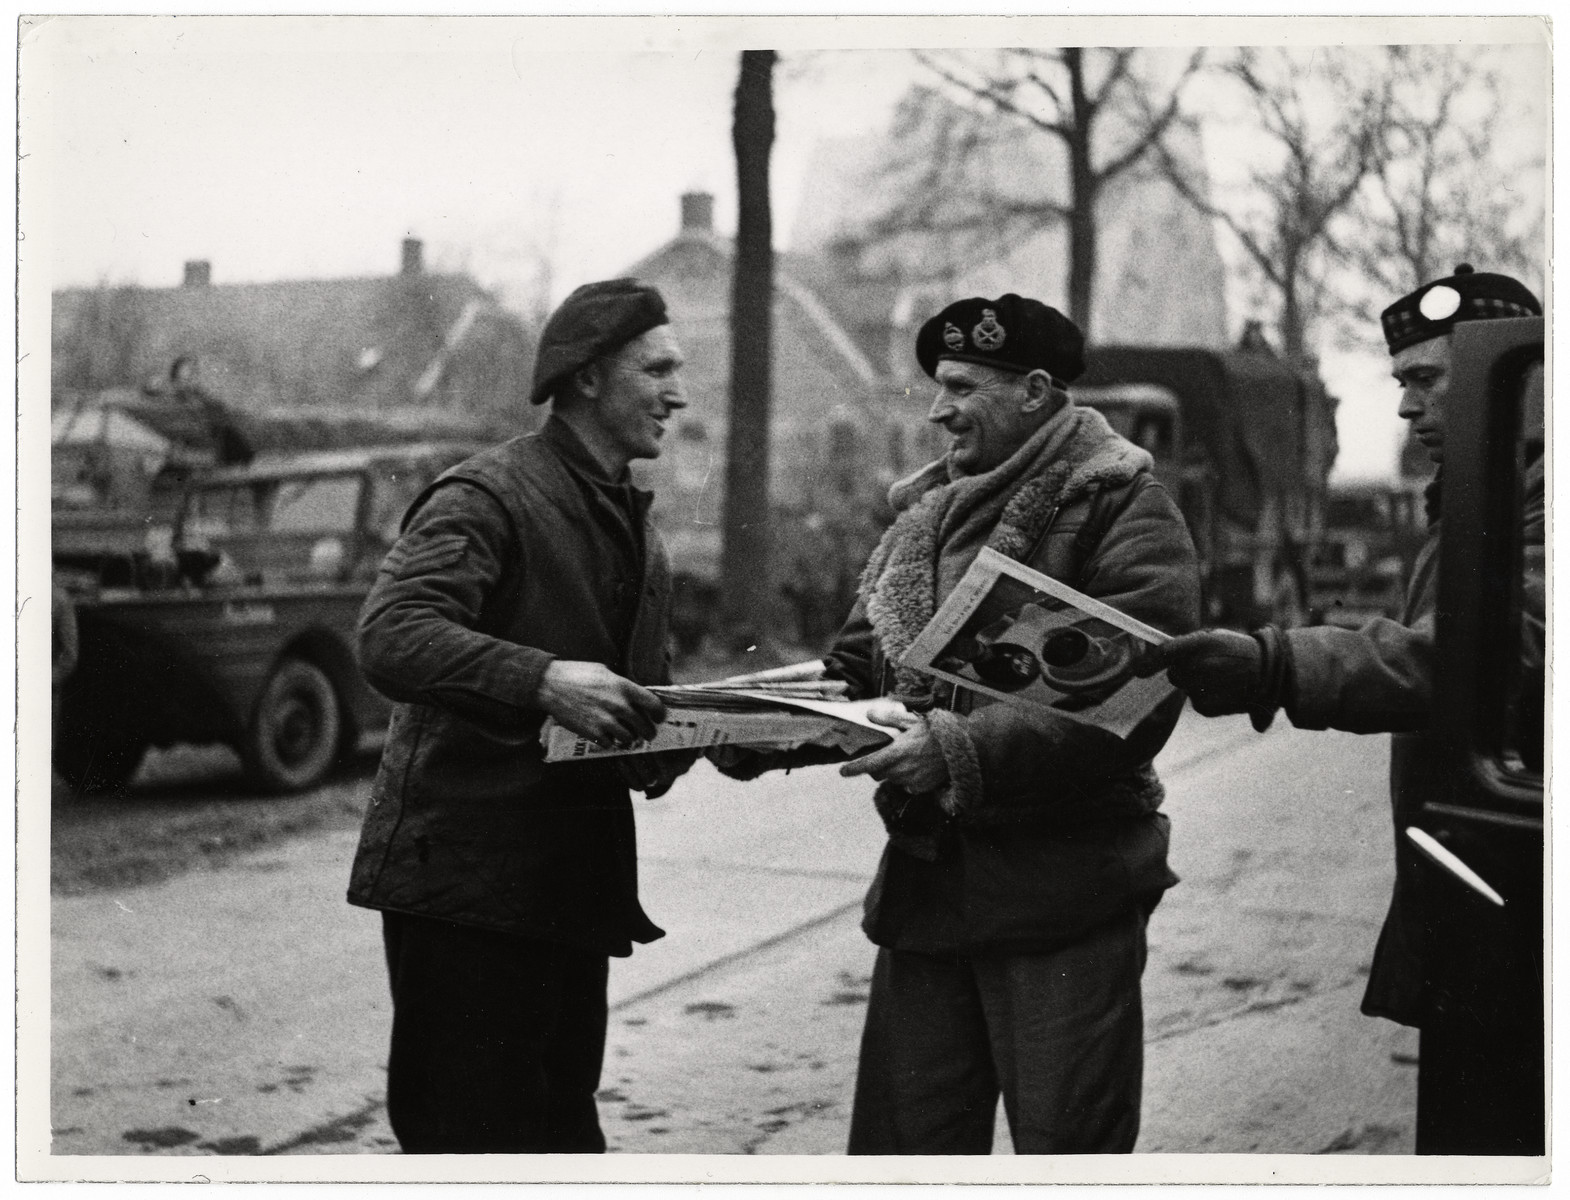 Field Marshal Bernard Montgomery visits British troops in Germany.

Original Caption: "Field Marshal Sir Bernard L. Montgomery has visited the British troops in the Cleve area, Germany. He arrived in a Dukw amphibious lorry. He took with him magazines, newspapers and cigarettes for the men."

This picture shows: On his return journey, the Field Marshal stops and gives some books to Sergeant Snelling (s outhall) R.A.S.C."